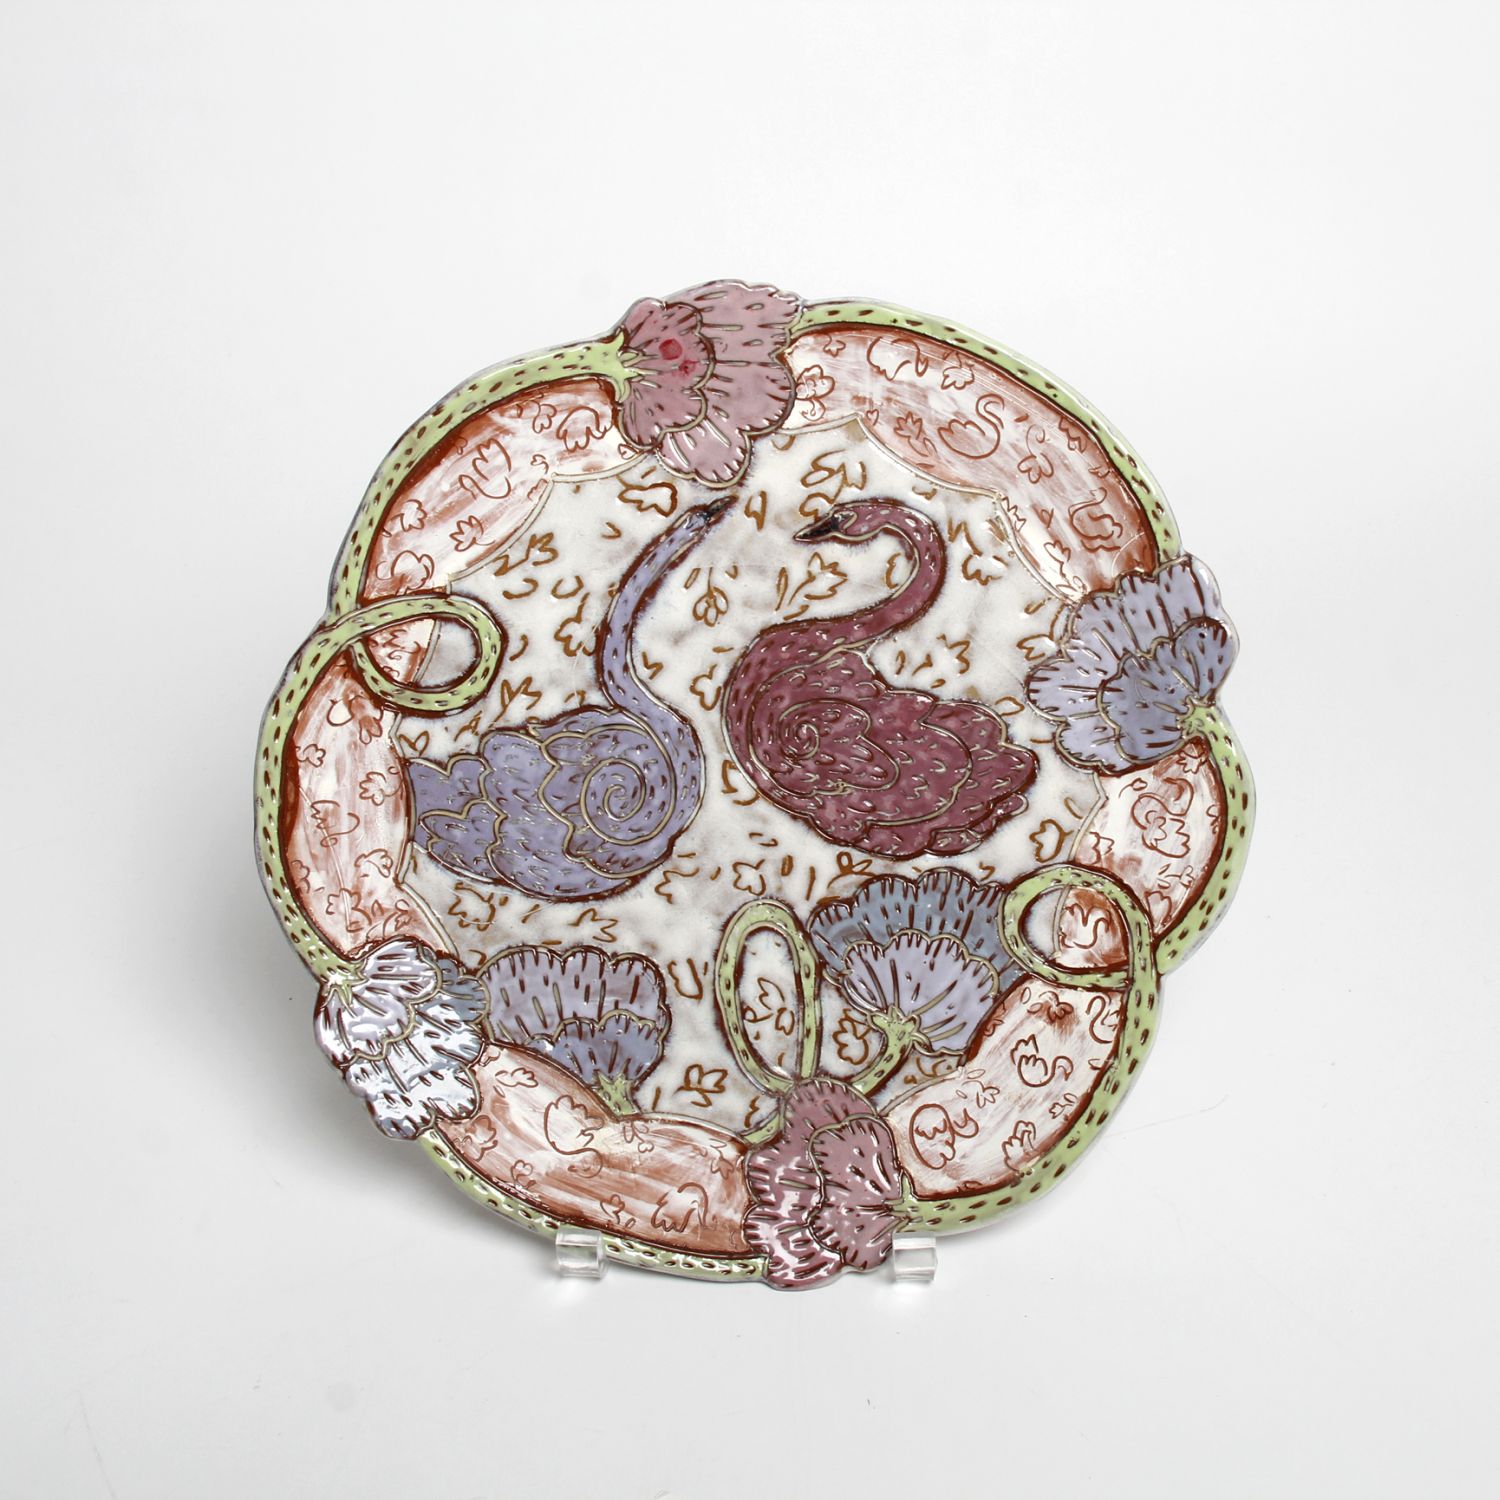 Zoe Pinnell: Swan plate Product Image 1 of 2